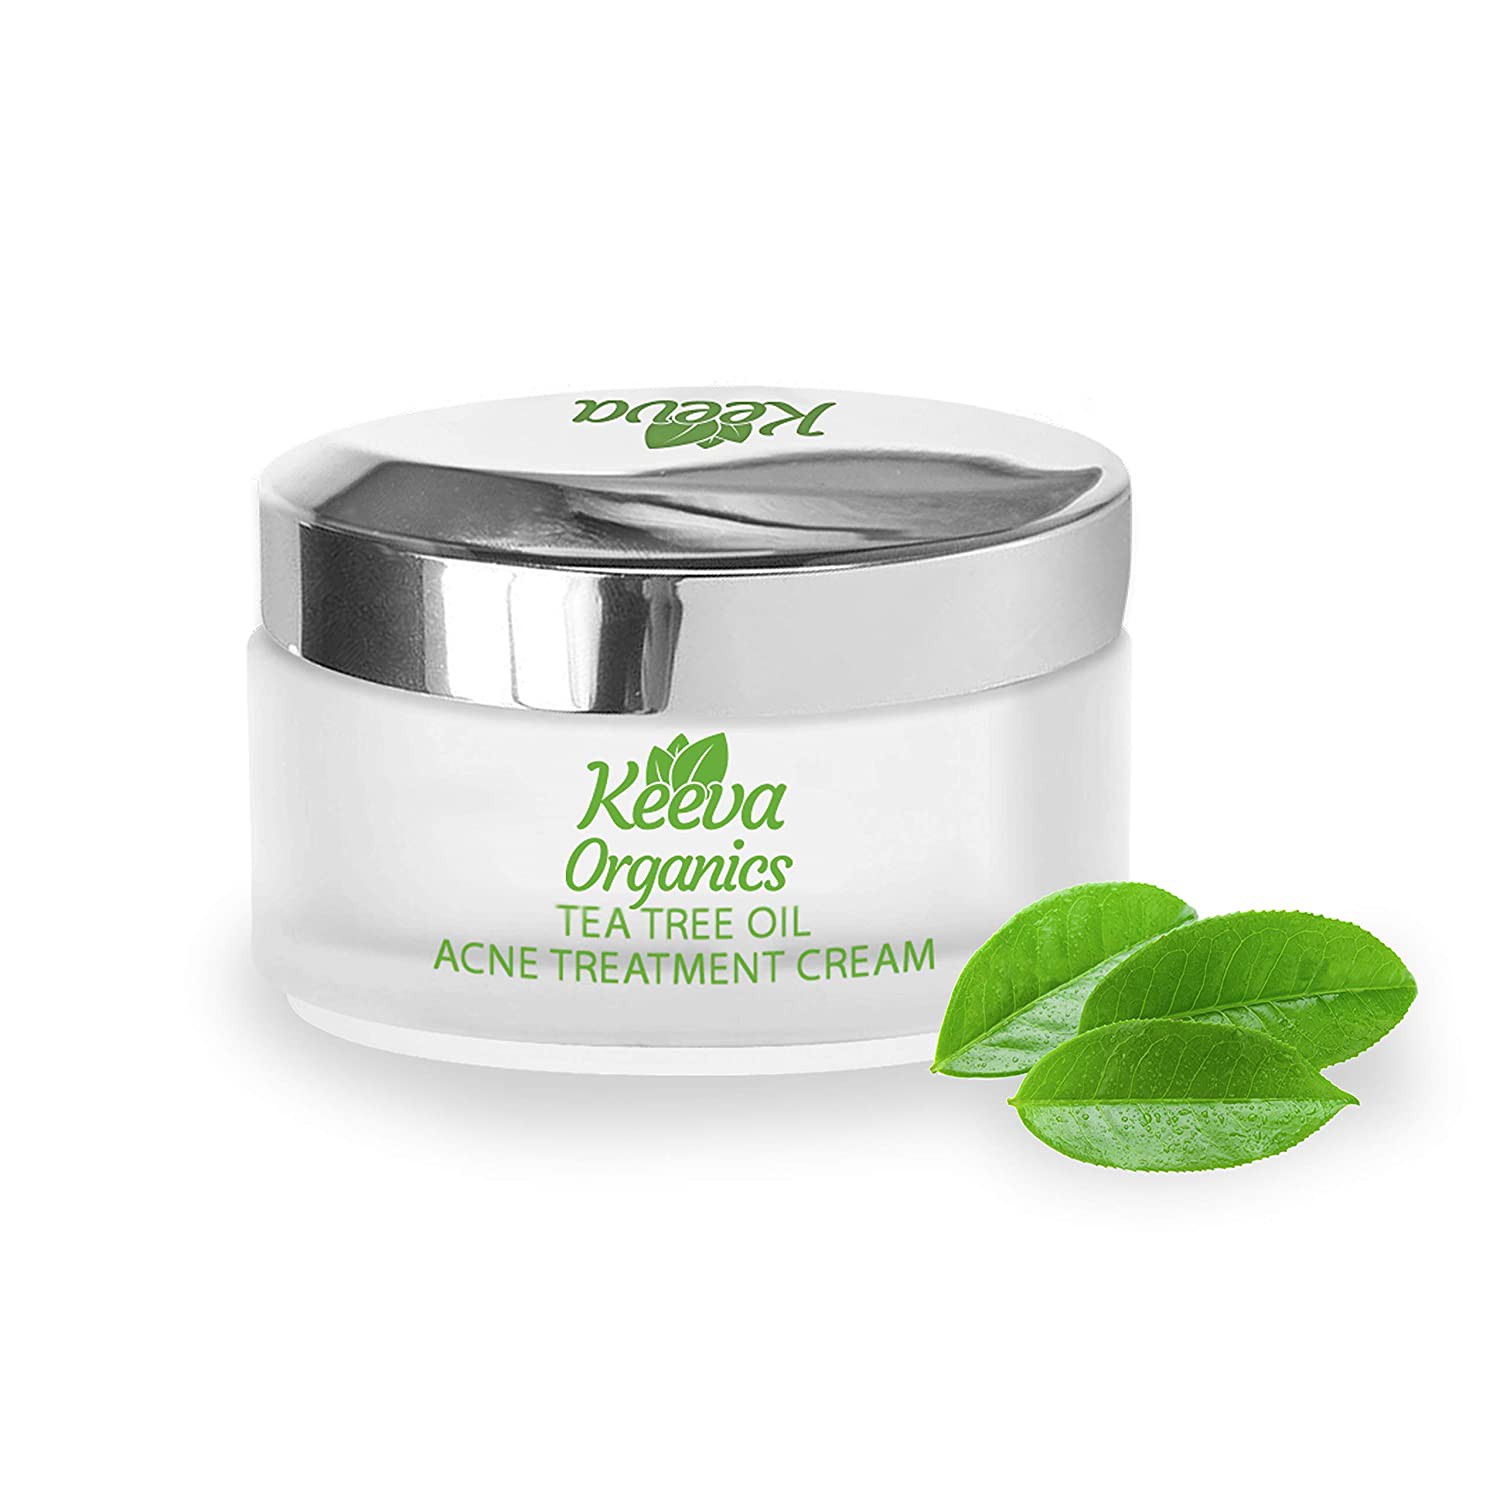 tea-tree-oil-for-acne with cash back rebate